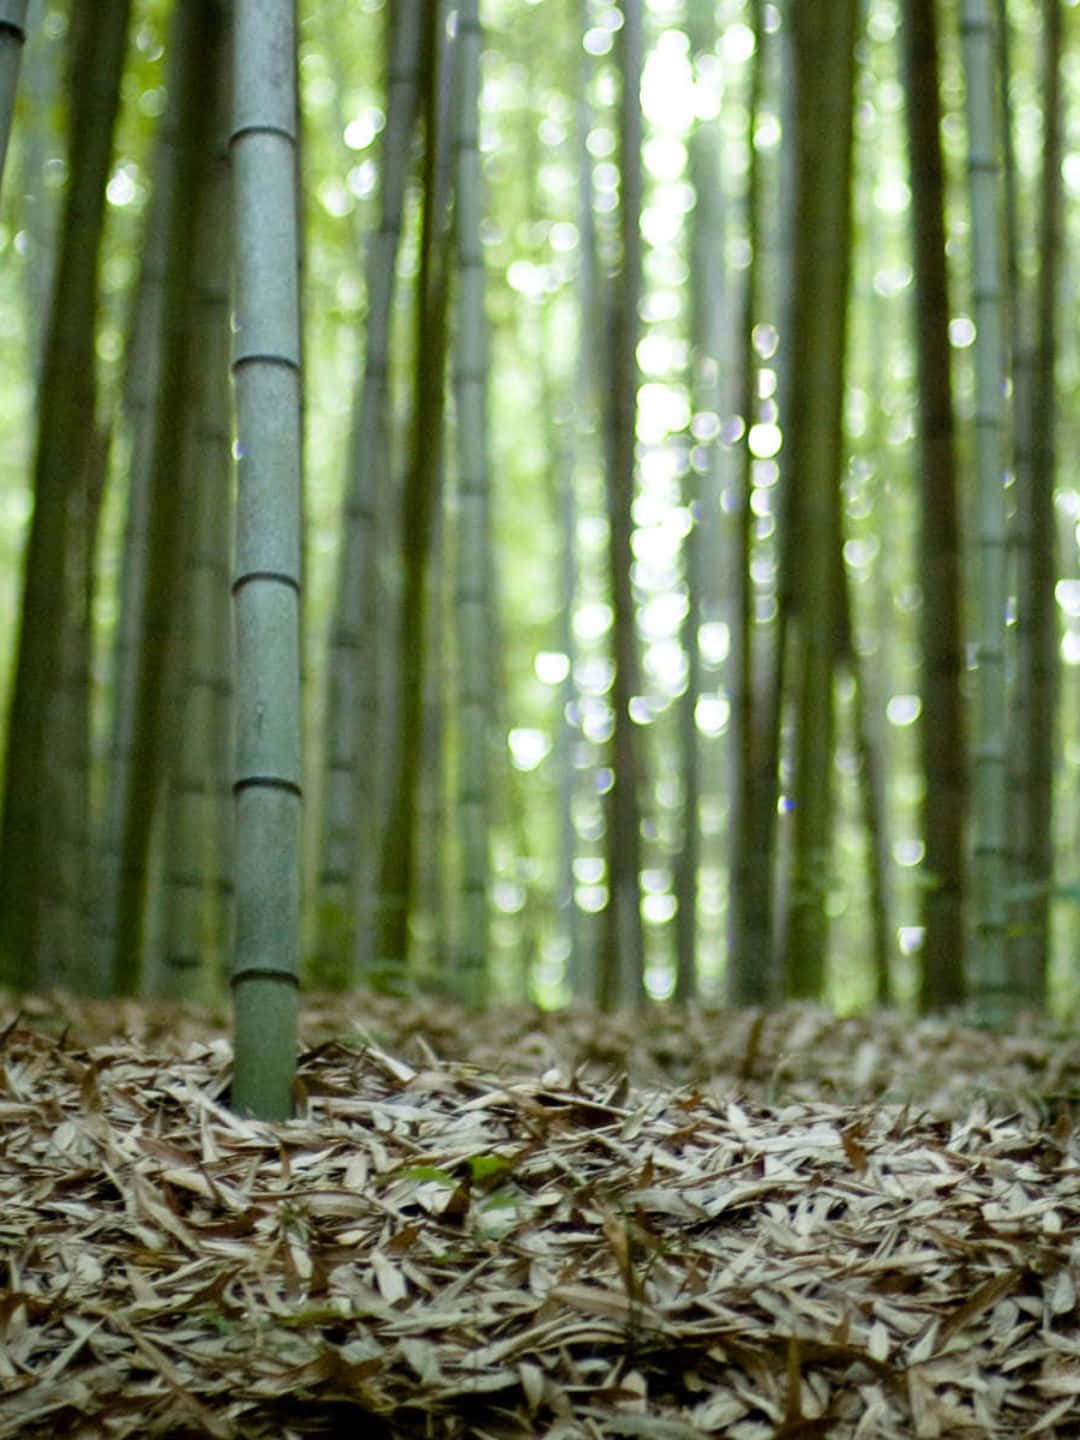 1440p Bamboo Background Dried Leaves On The Ground